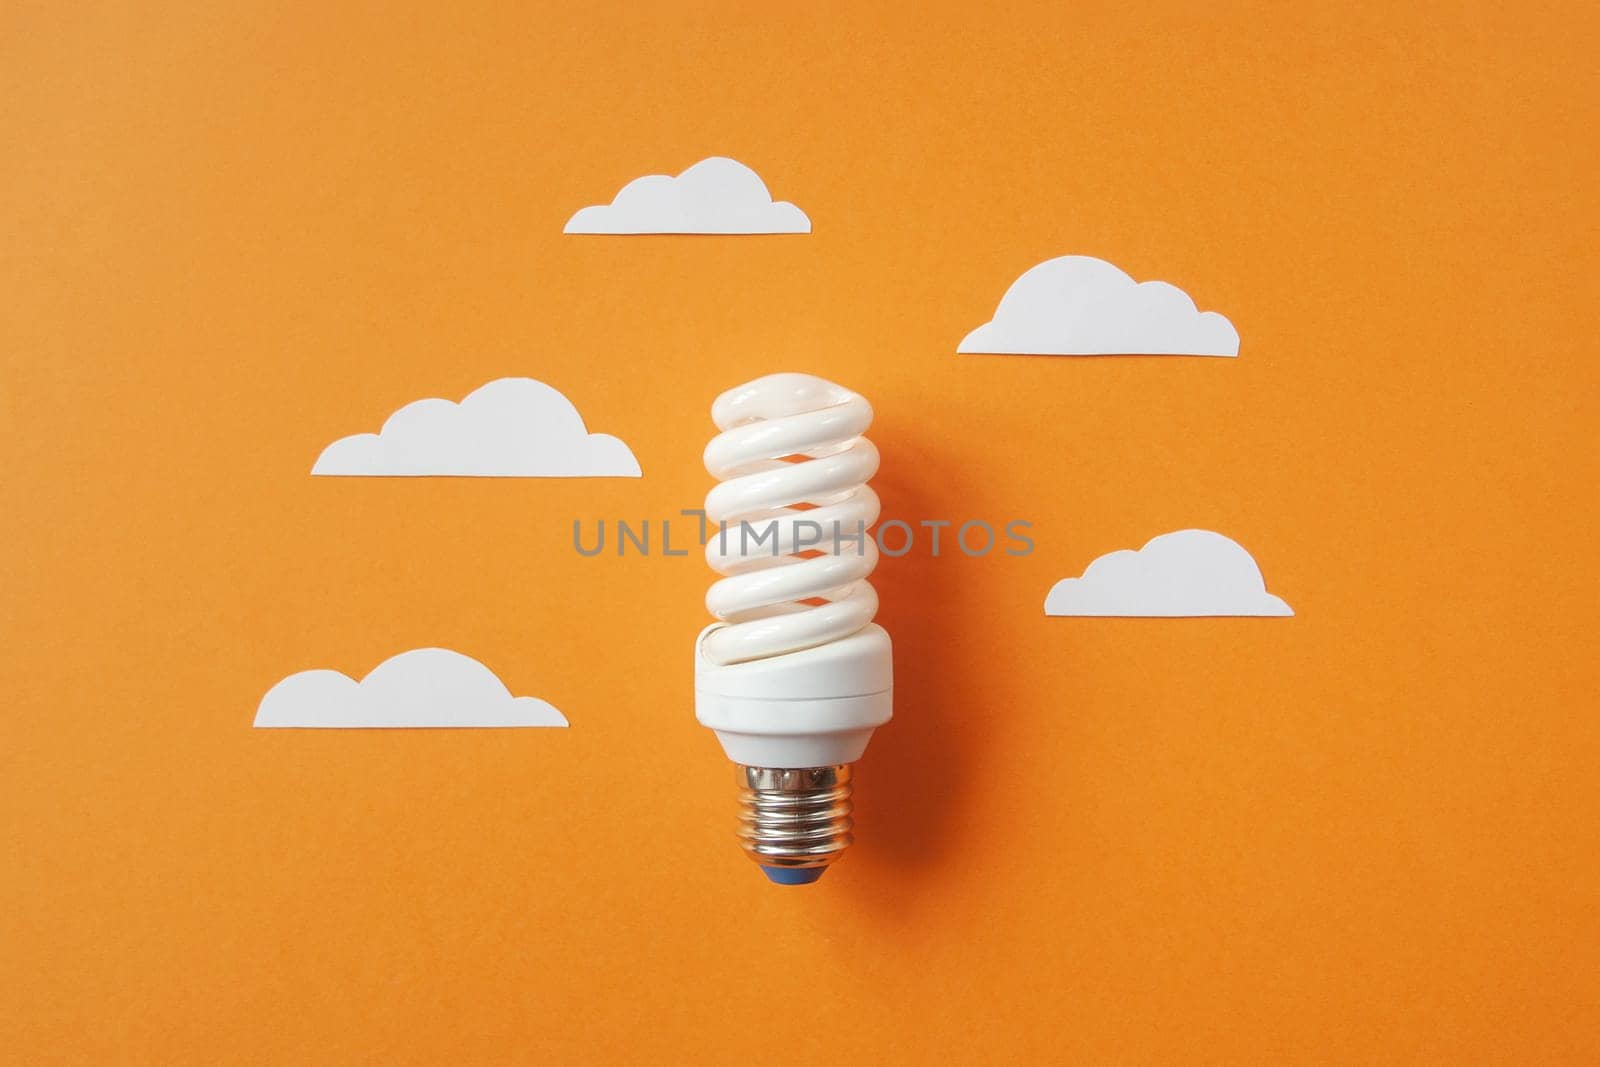 Light bulb with white cut out clouds on orange background. Idea concept. Energy and electricity. alternative energy sources. Innovation and thinking out the box symbols. Creativity and inspiration